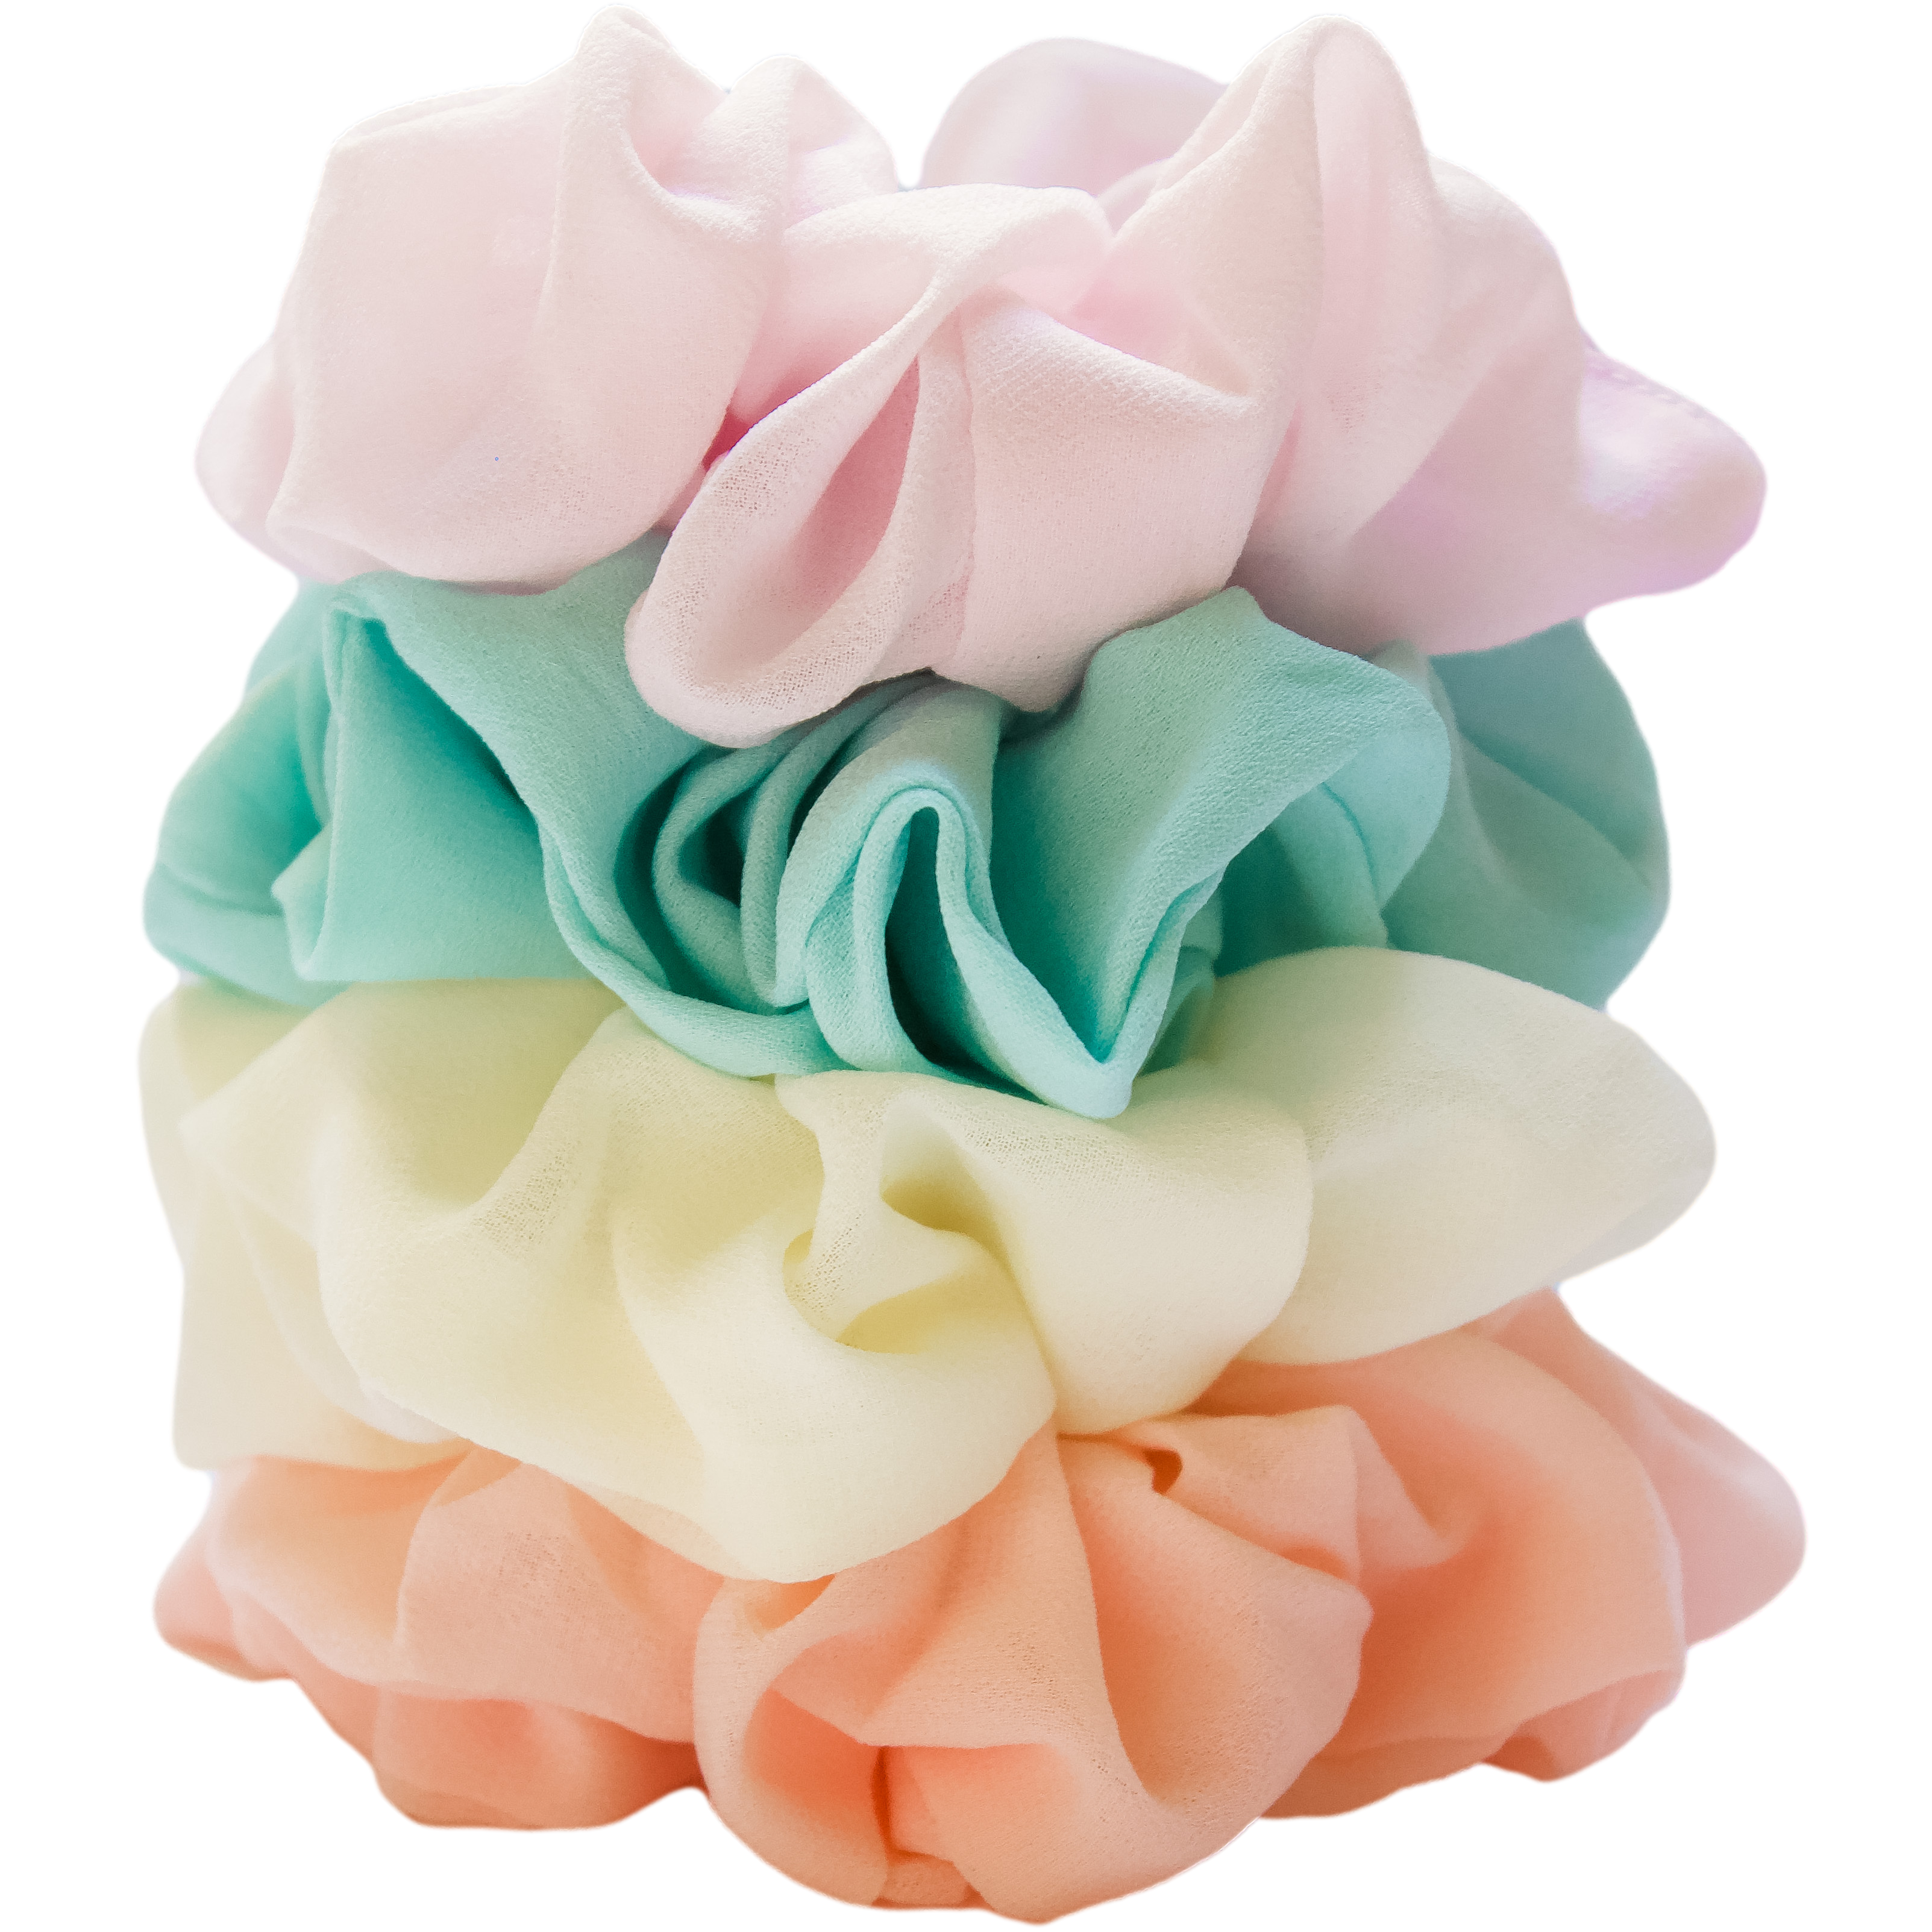 Stack of pastel colored chiffon scrunchies in peach, pale yellow, aqua, and light purple